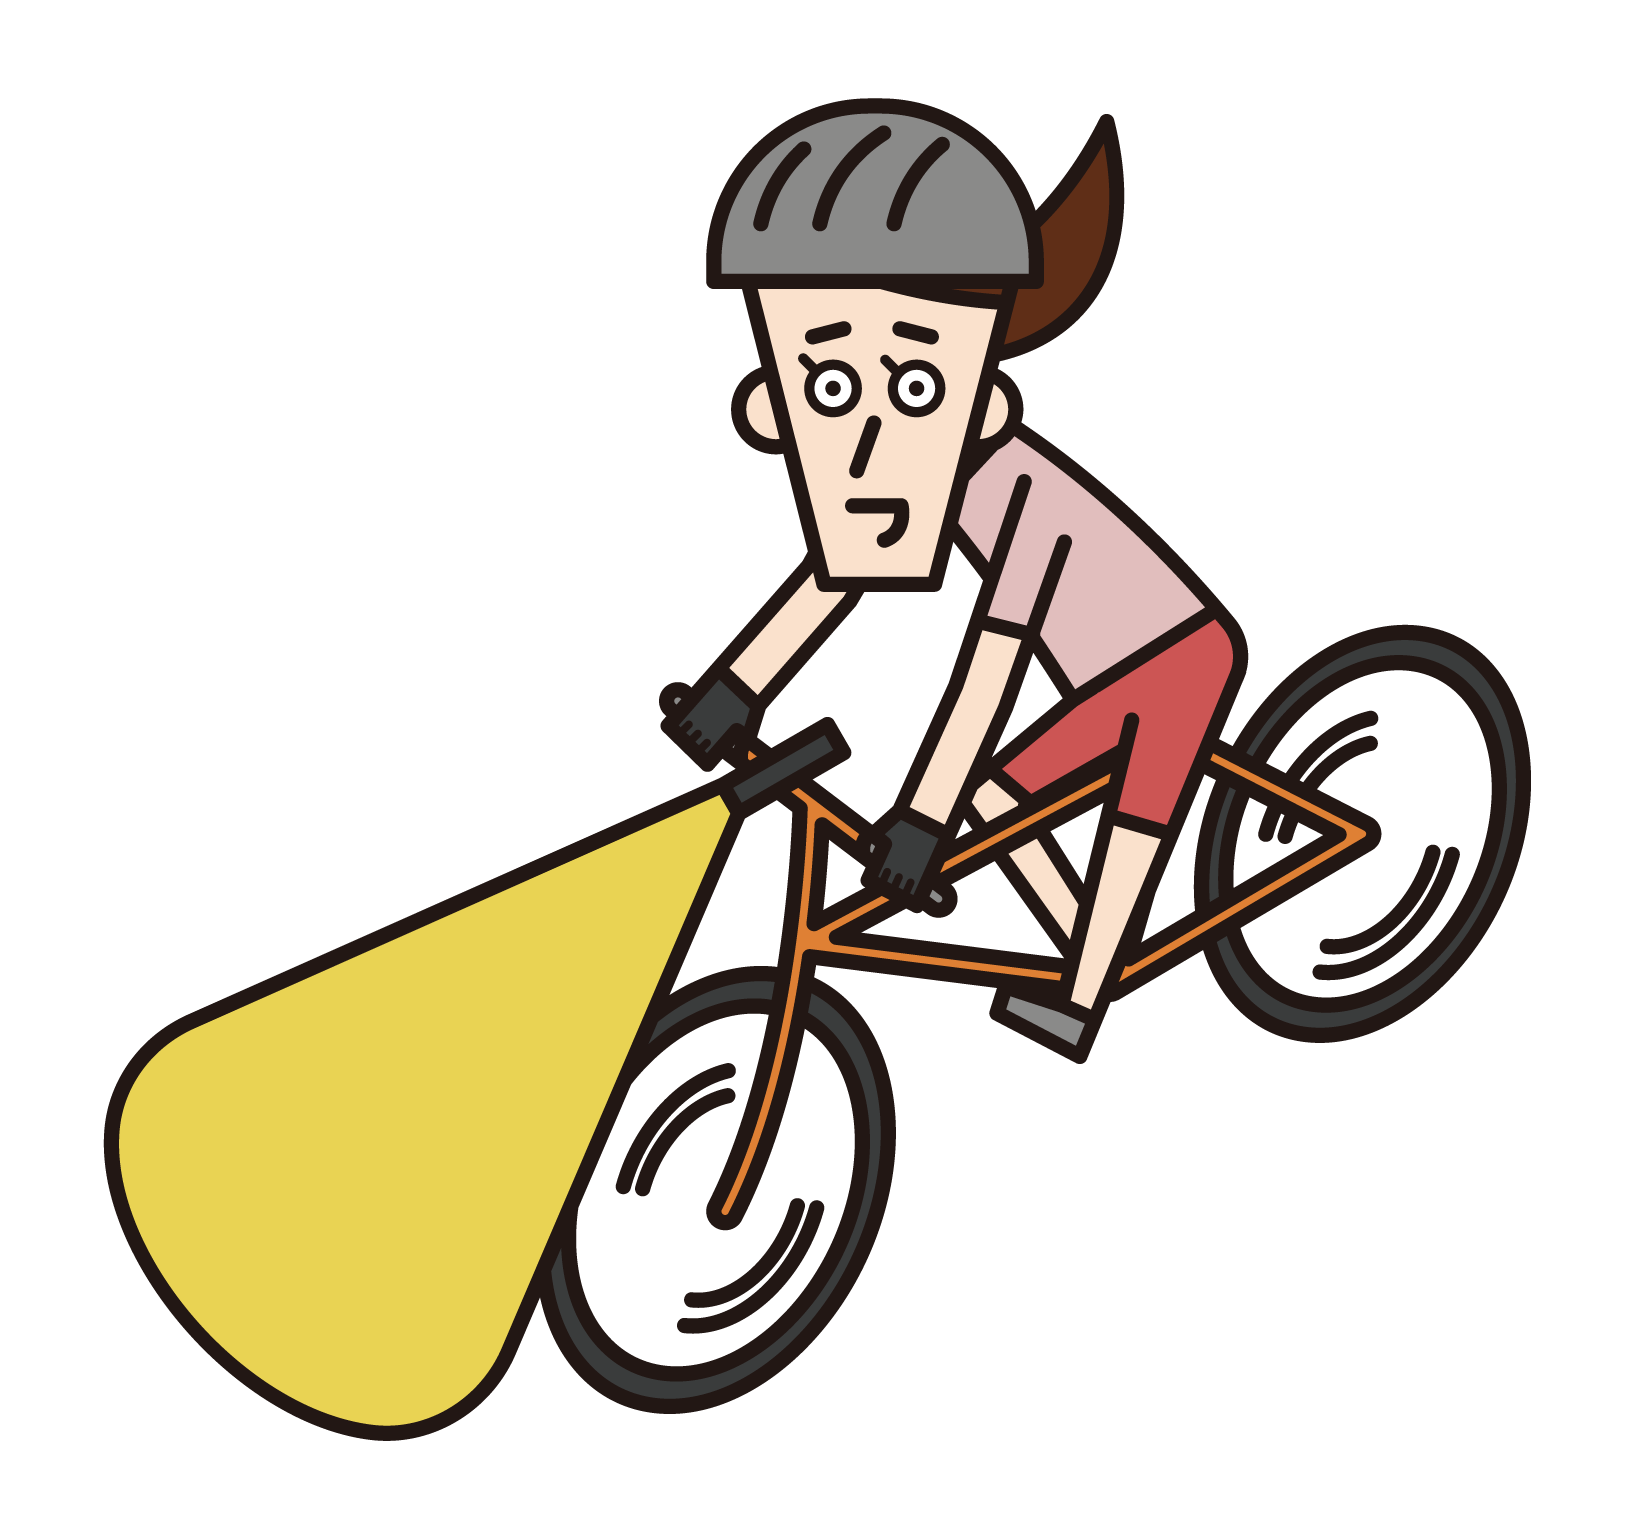 Illustration of a woman riding a bicycle with a light on it